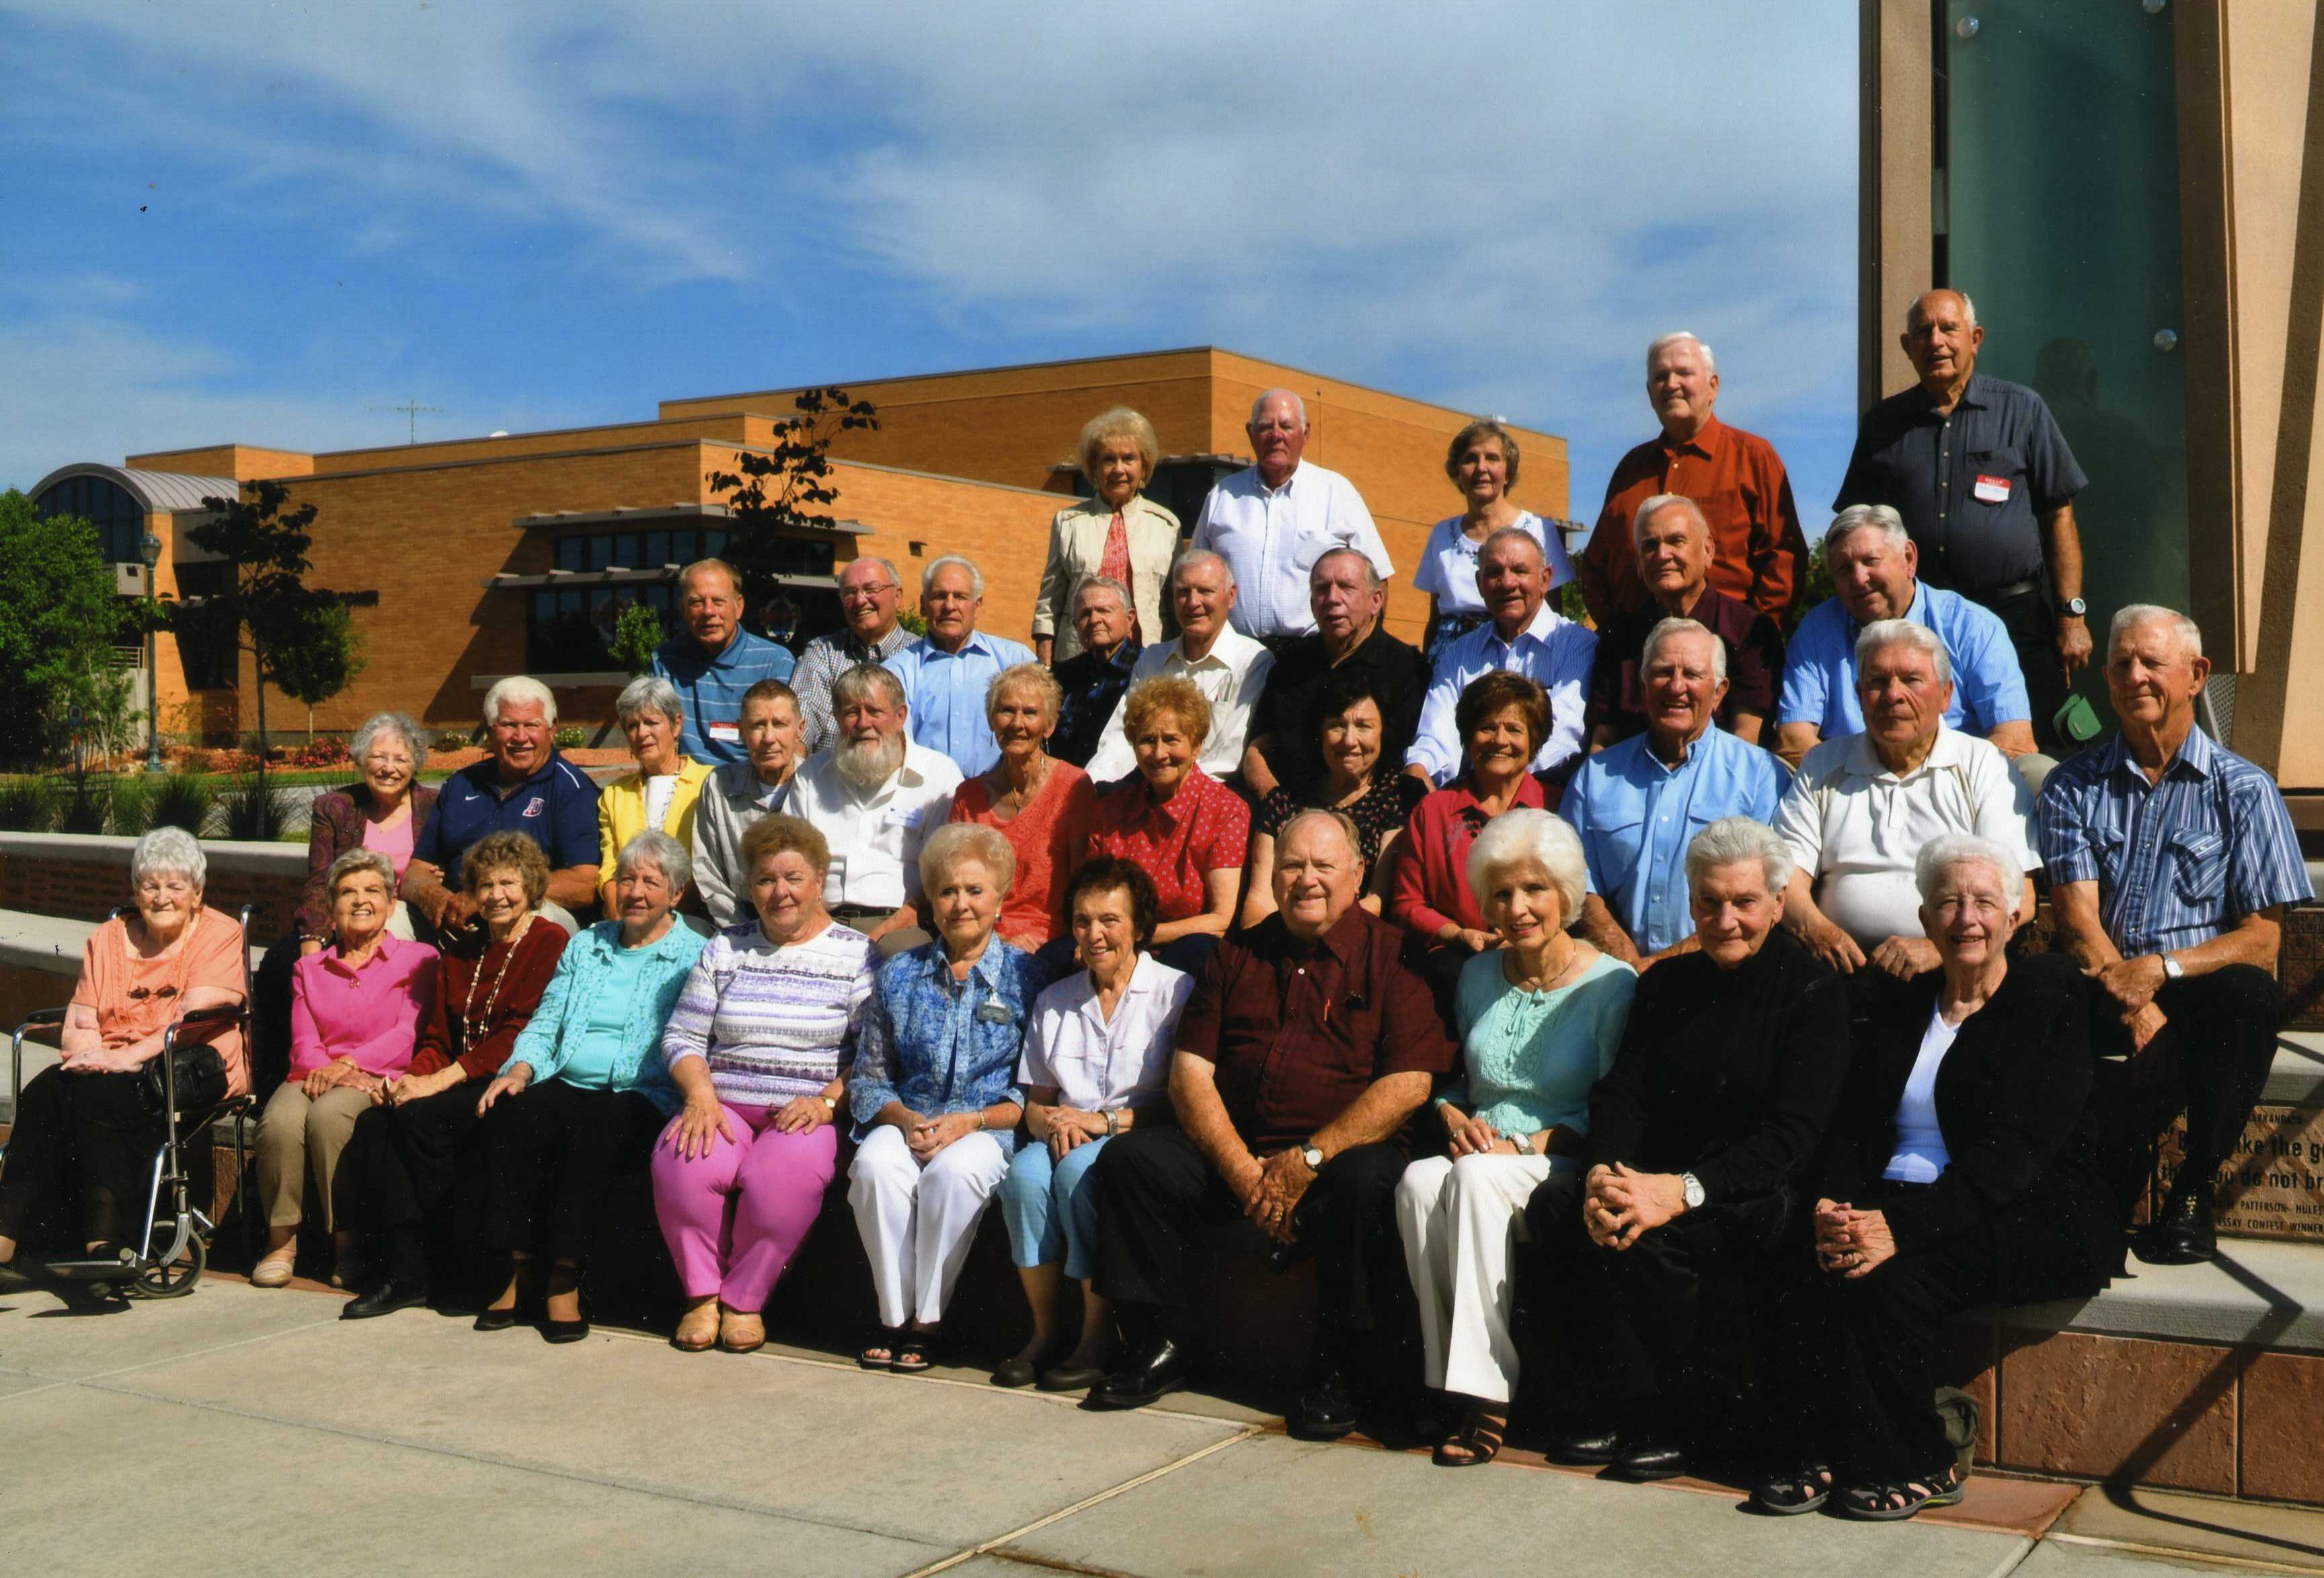 People at the 2015 reunion of the Dixie High School Class of 1955